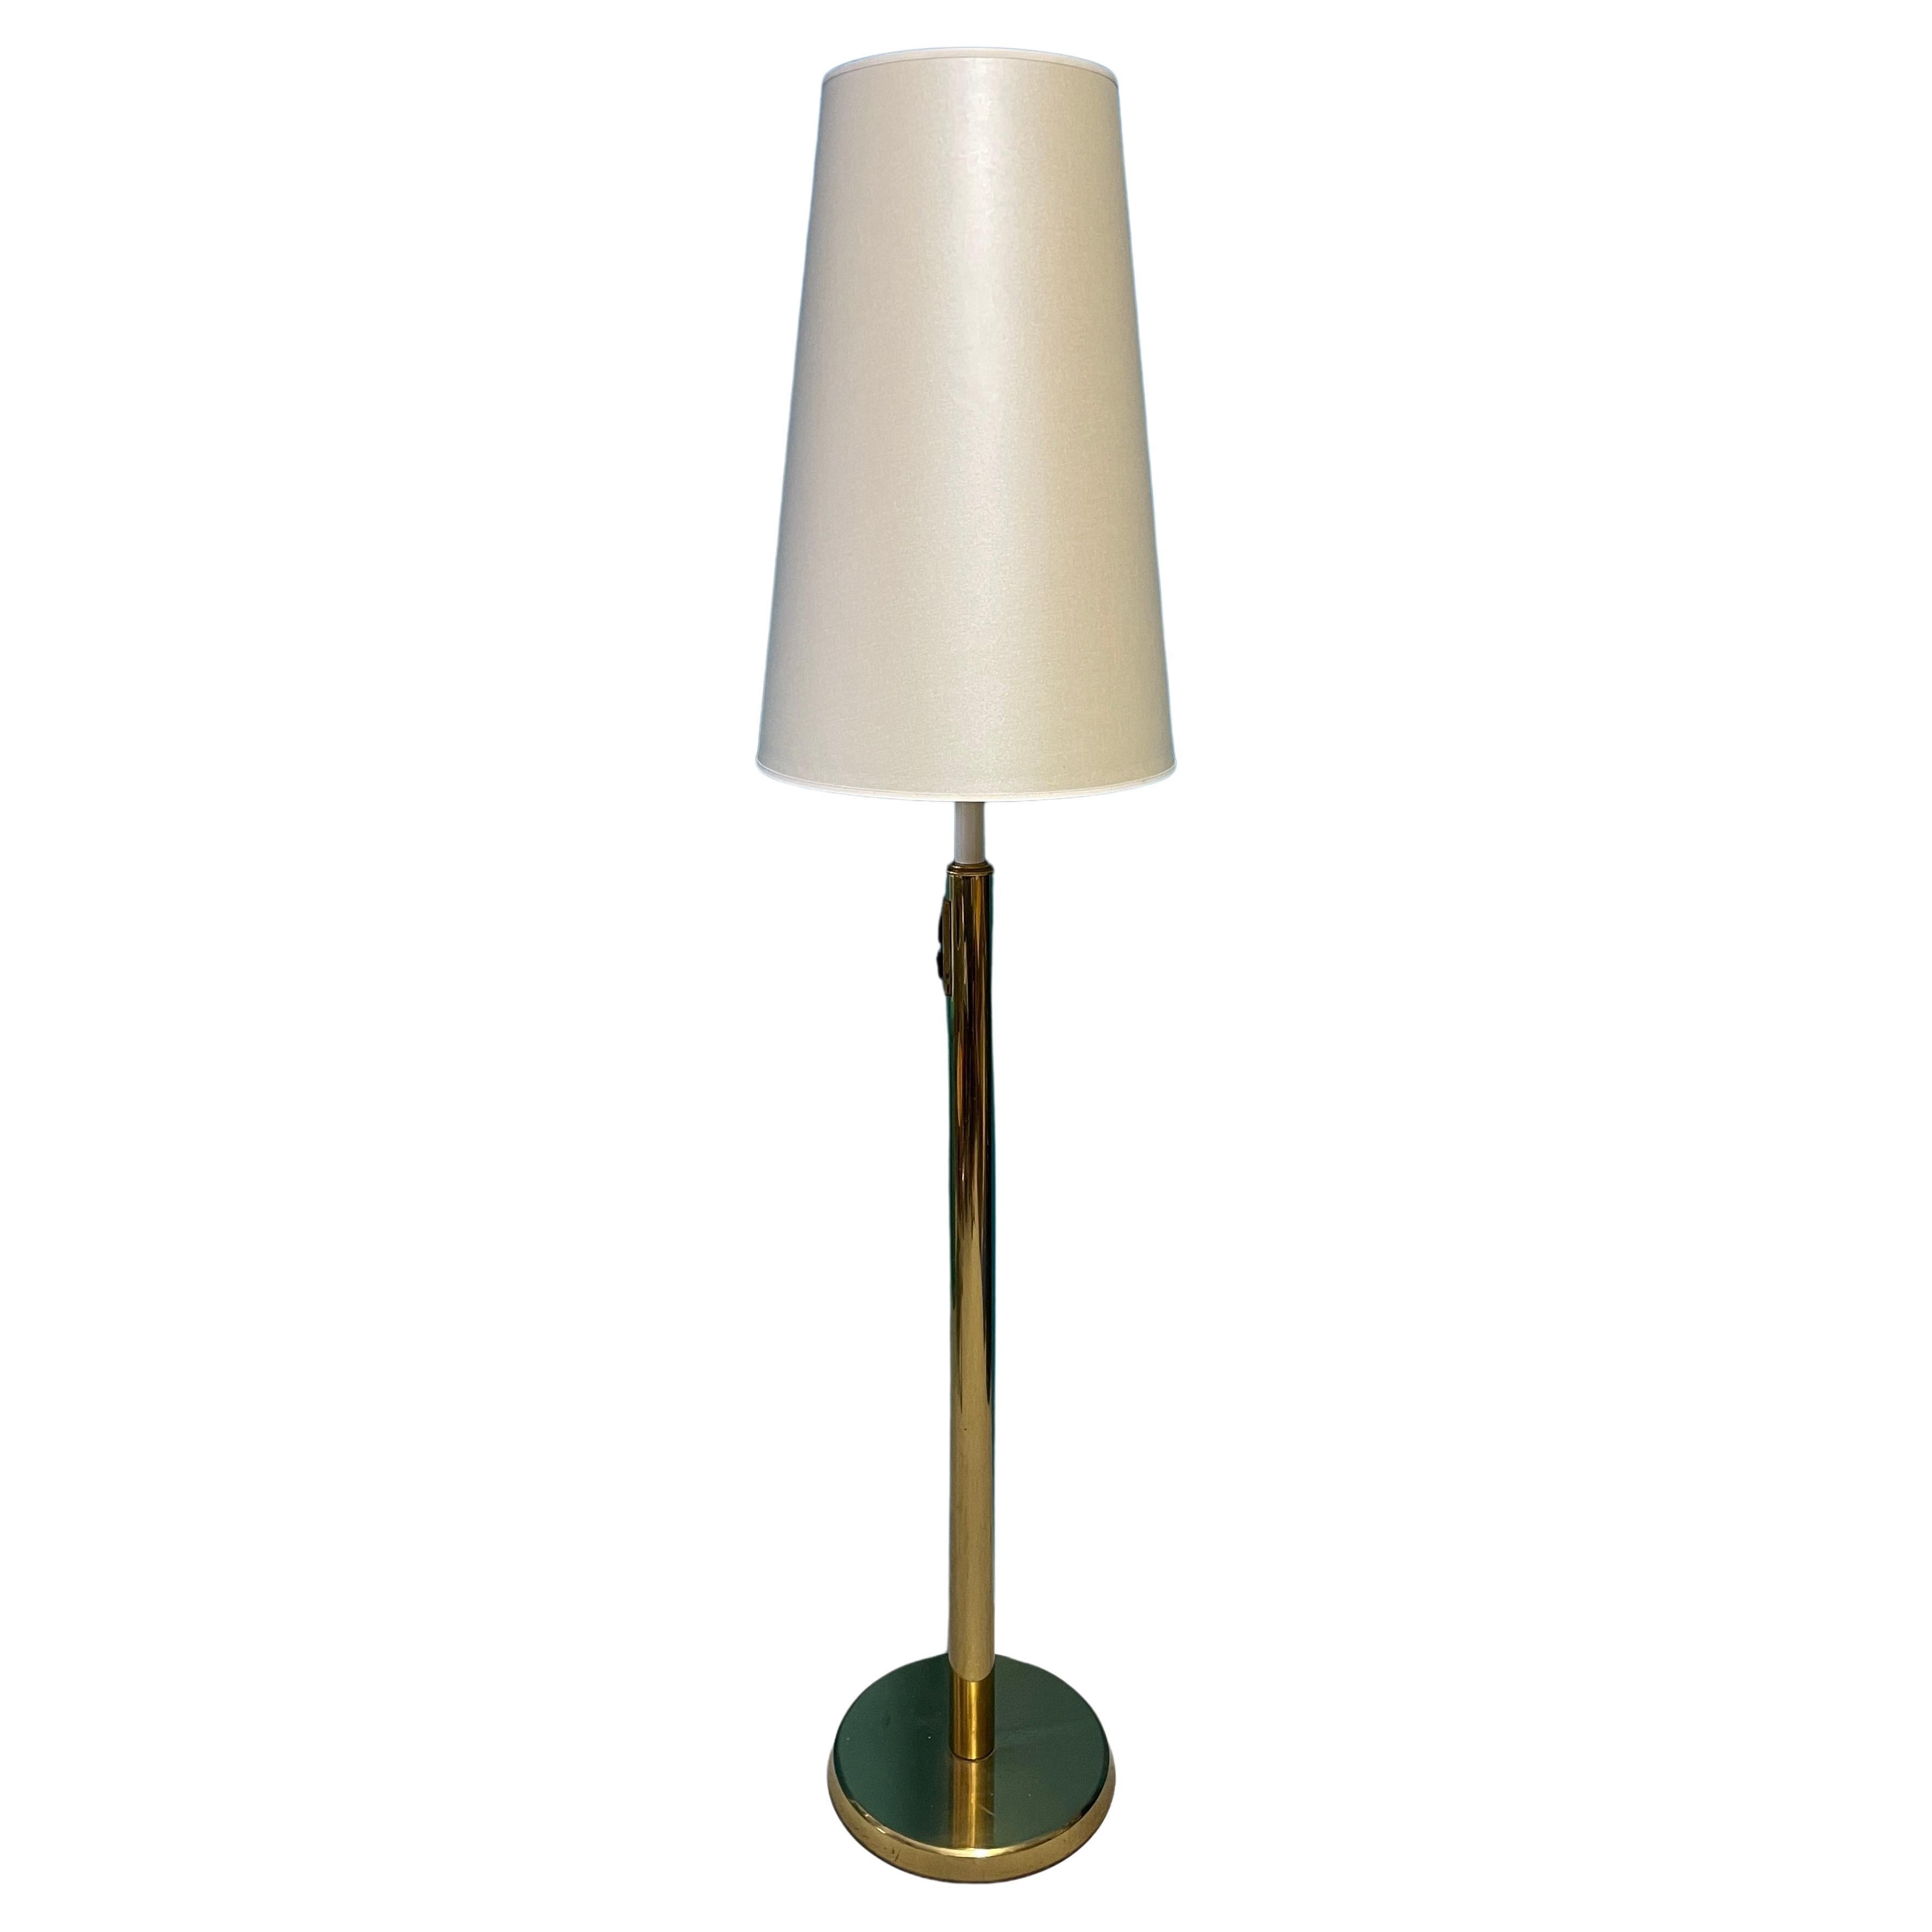 Big brass floor lamp from 1960s. H.K Aro & Knit. Made in Finland